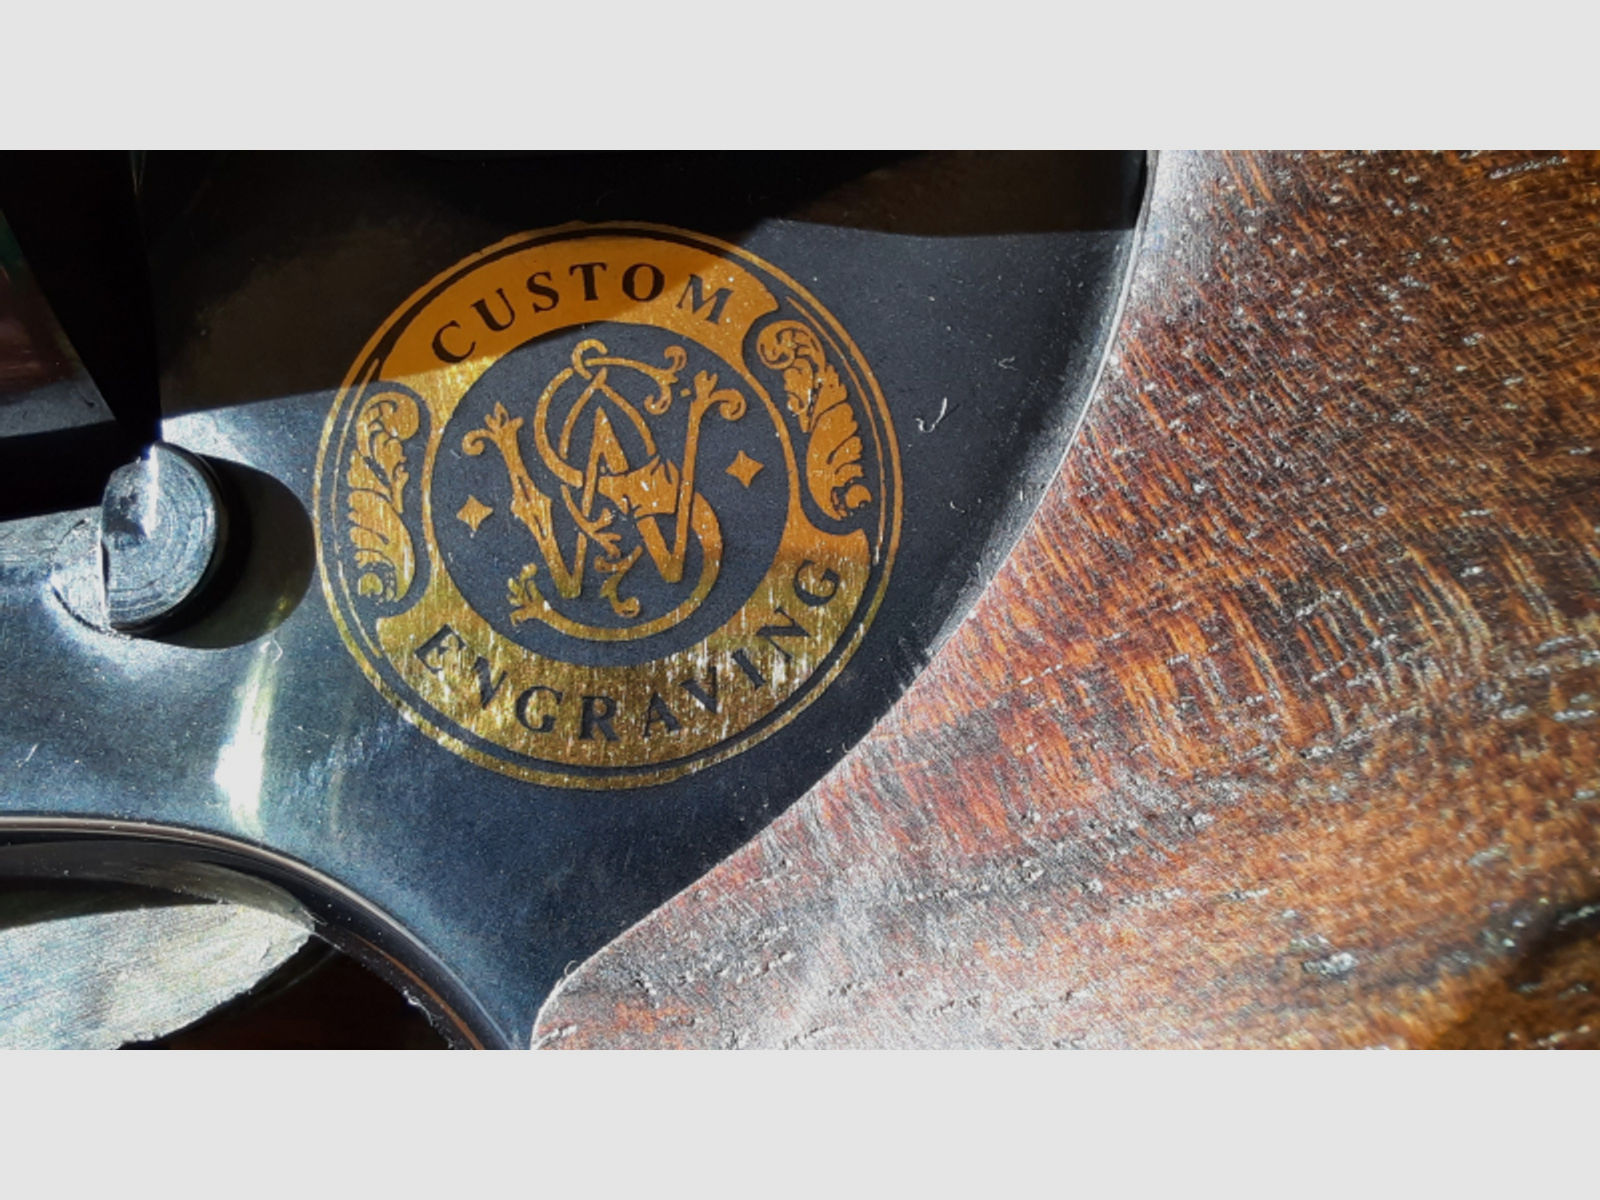 Smith&Wesson S&W 686 .357Mag American Traditions